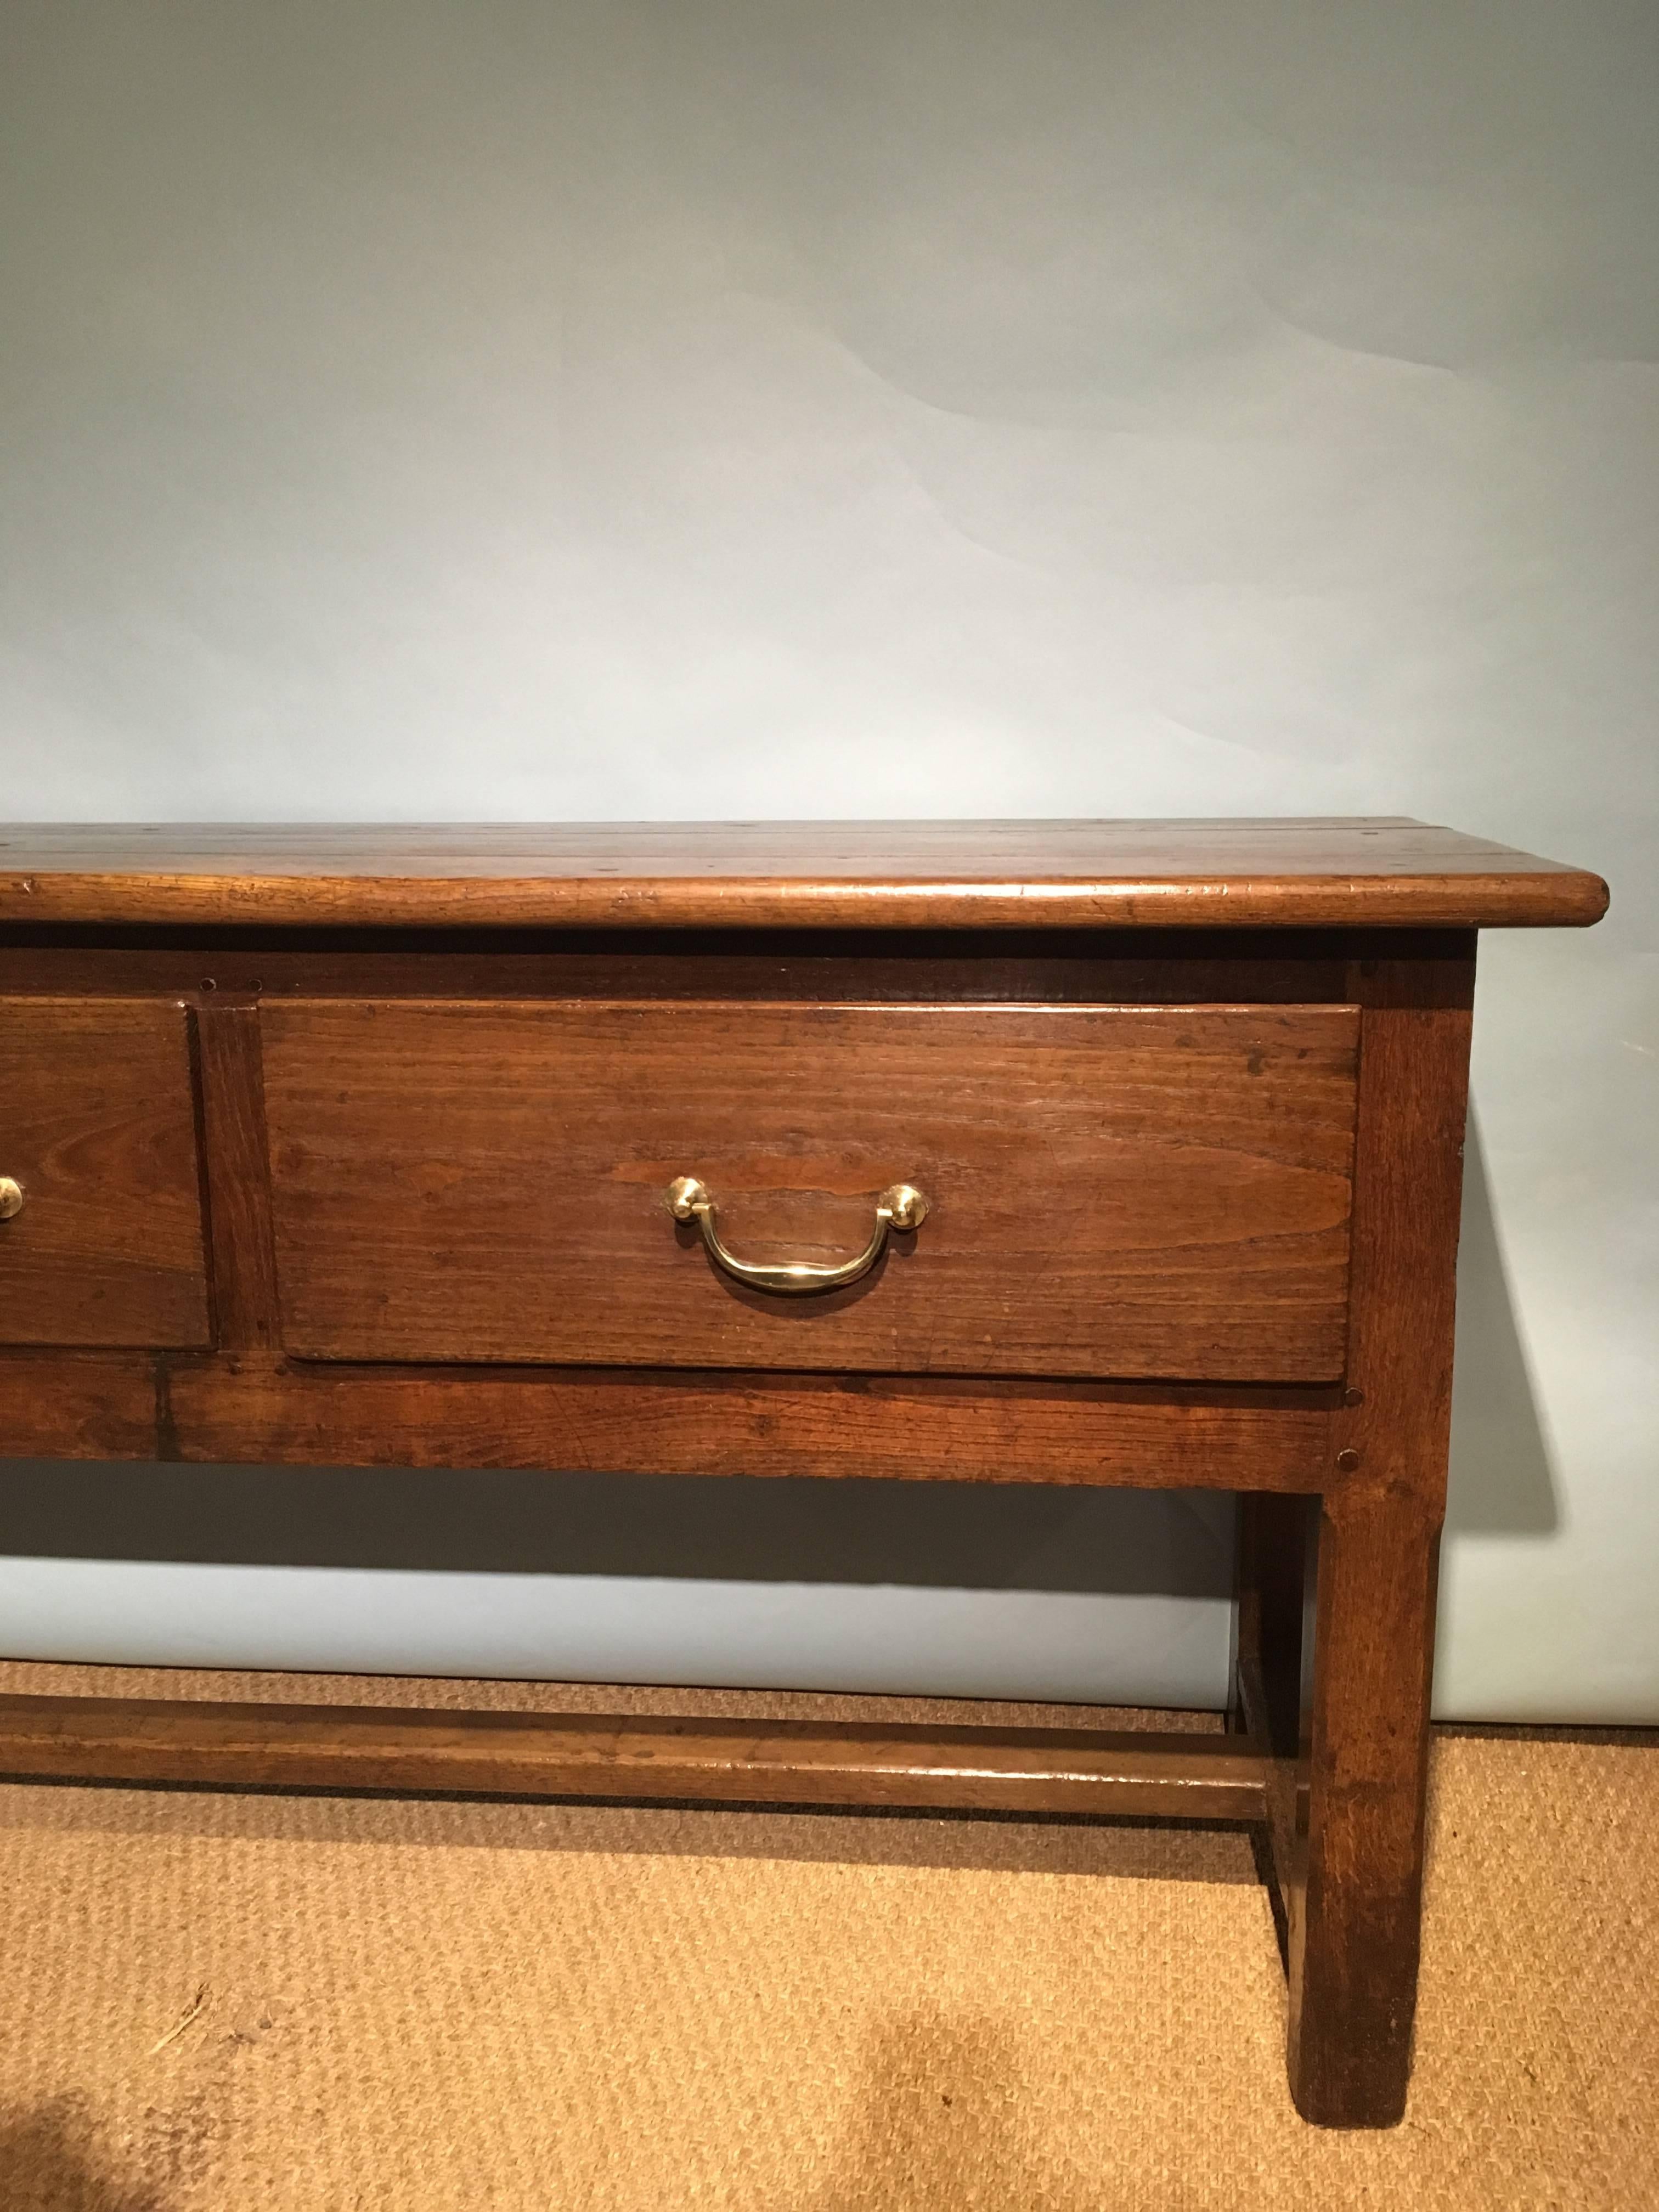 Fab early 19th century dresser base / server 

Dating to circa 1830s constructed from solid chestnut, three large drawers with original brass handles, you can see the indentations the handles have left over all these years, lovely panelled back so